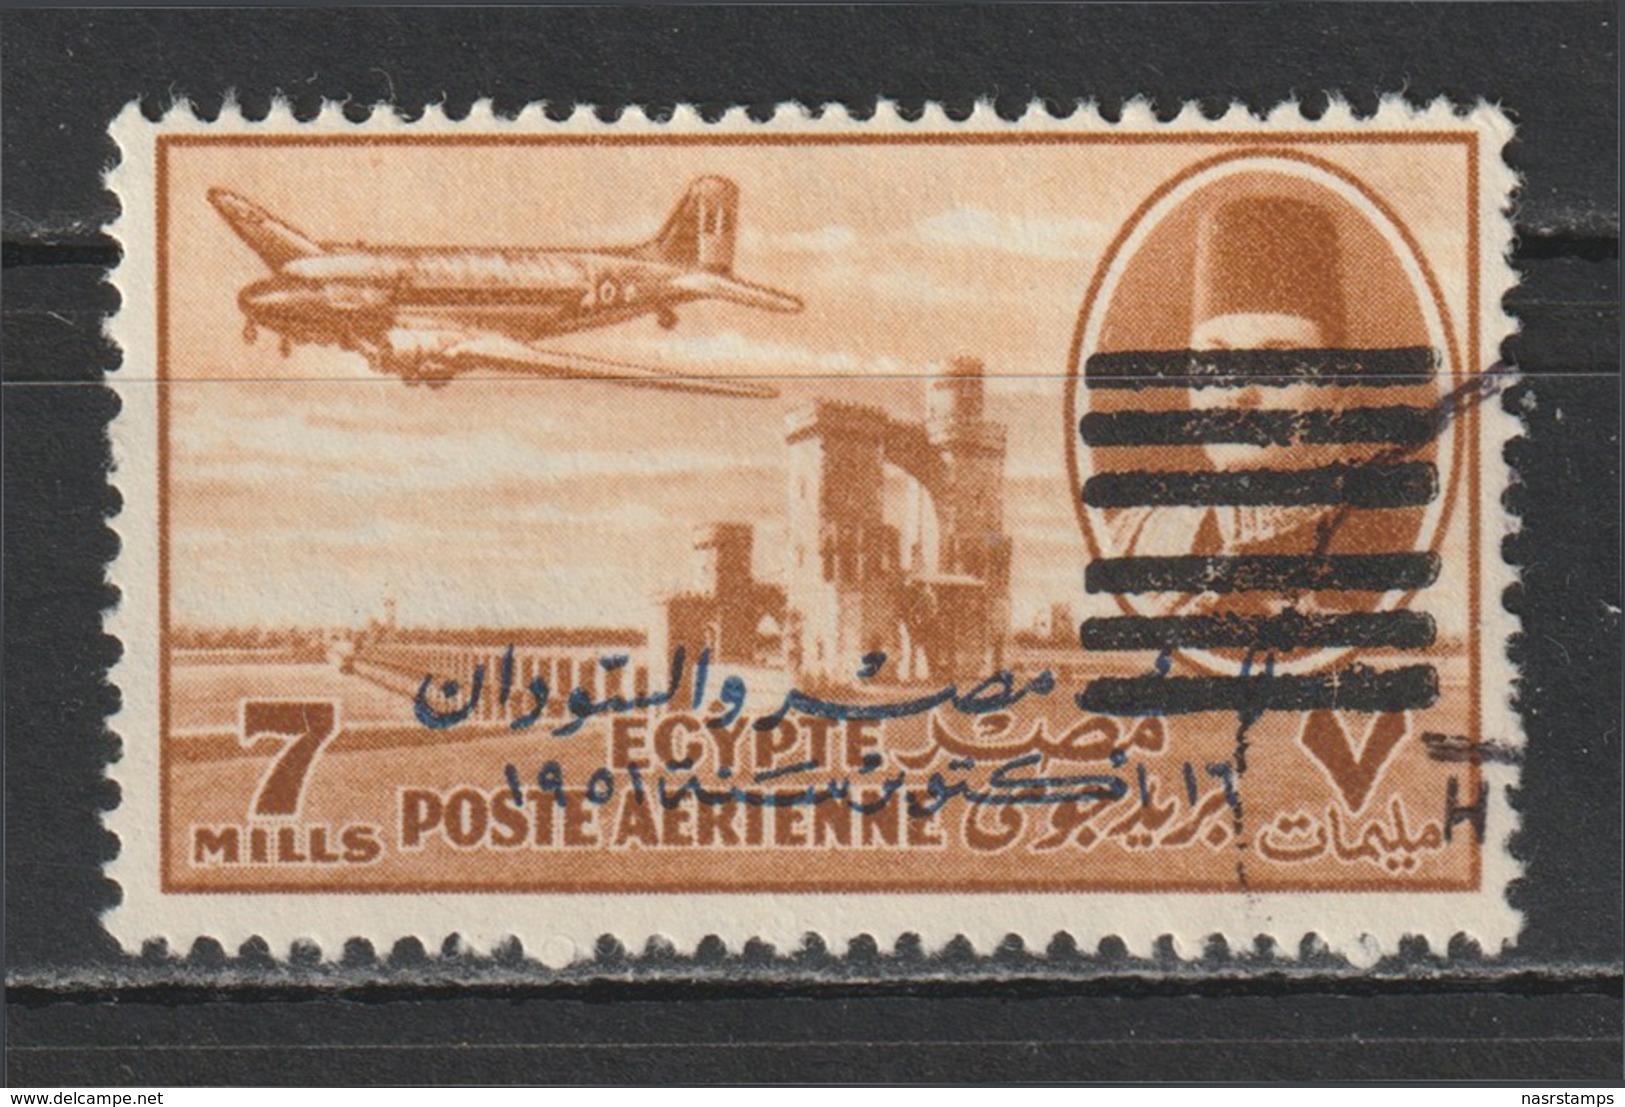 Egypt - 1953 - Unlisted - Unrecorded - Scarce - ( King Farouk - Overprinted 6 Bars On M/s - 7m  ) - Used - No Gum - Usati